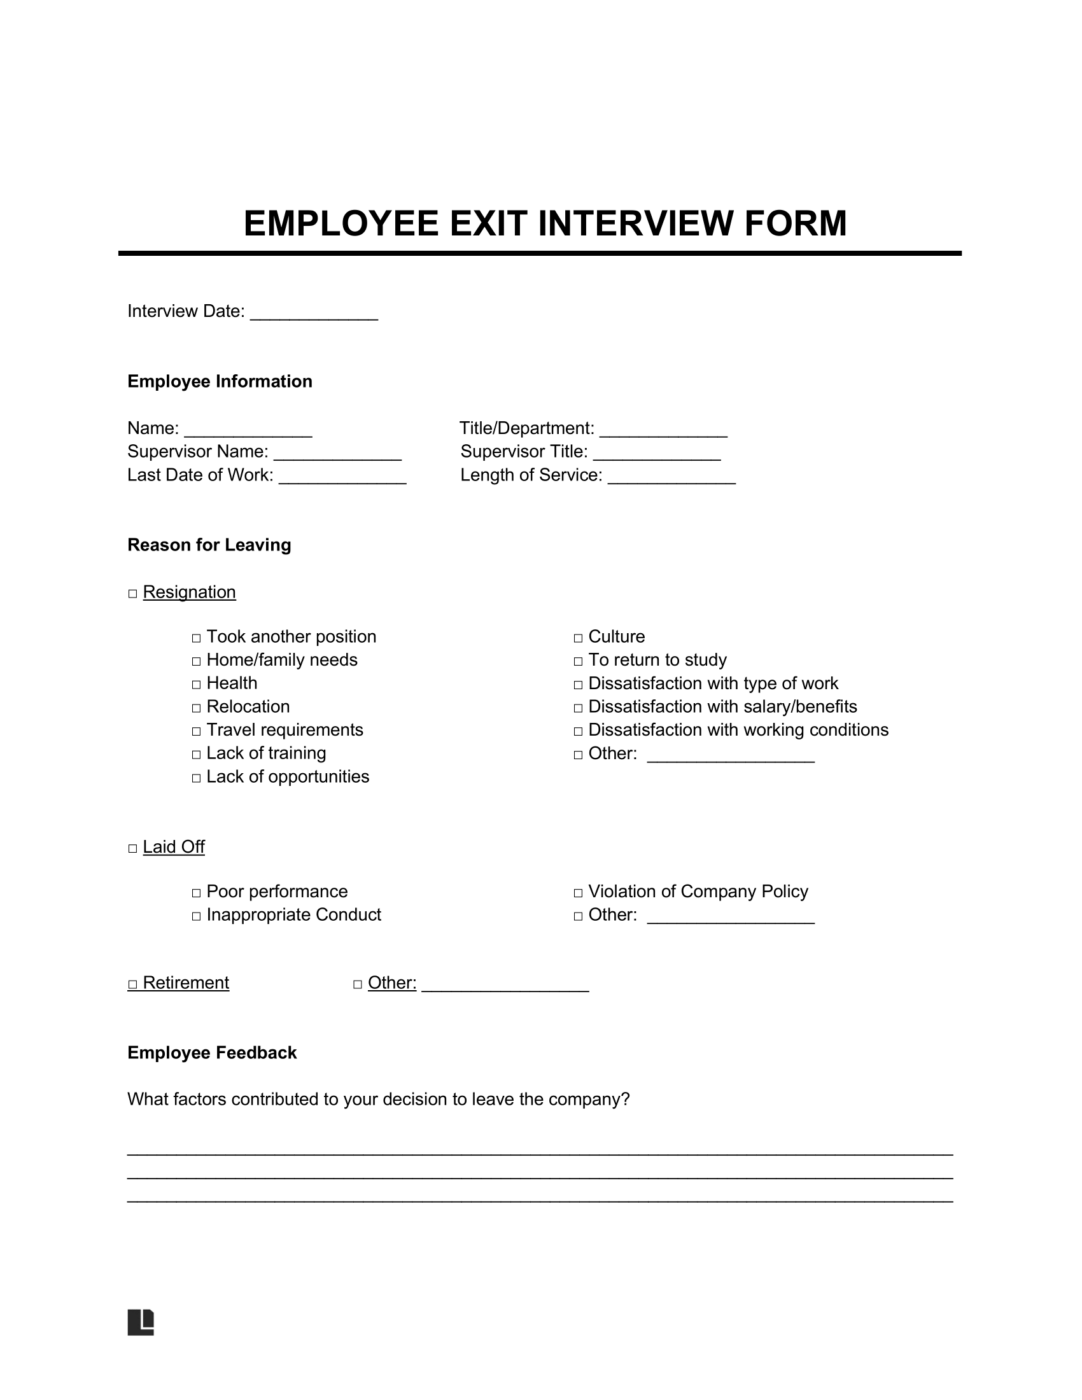 Employee-Exit-Interview-Form